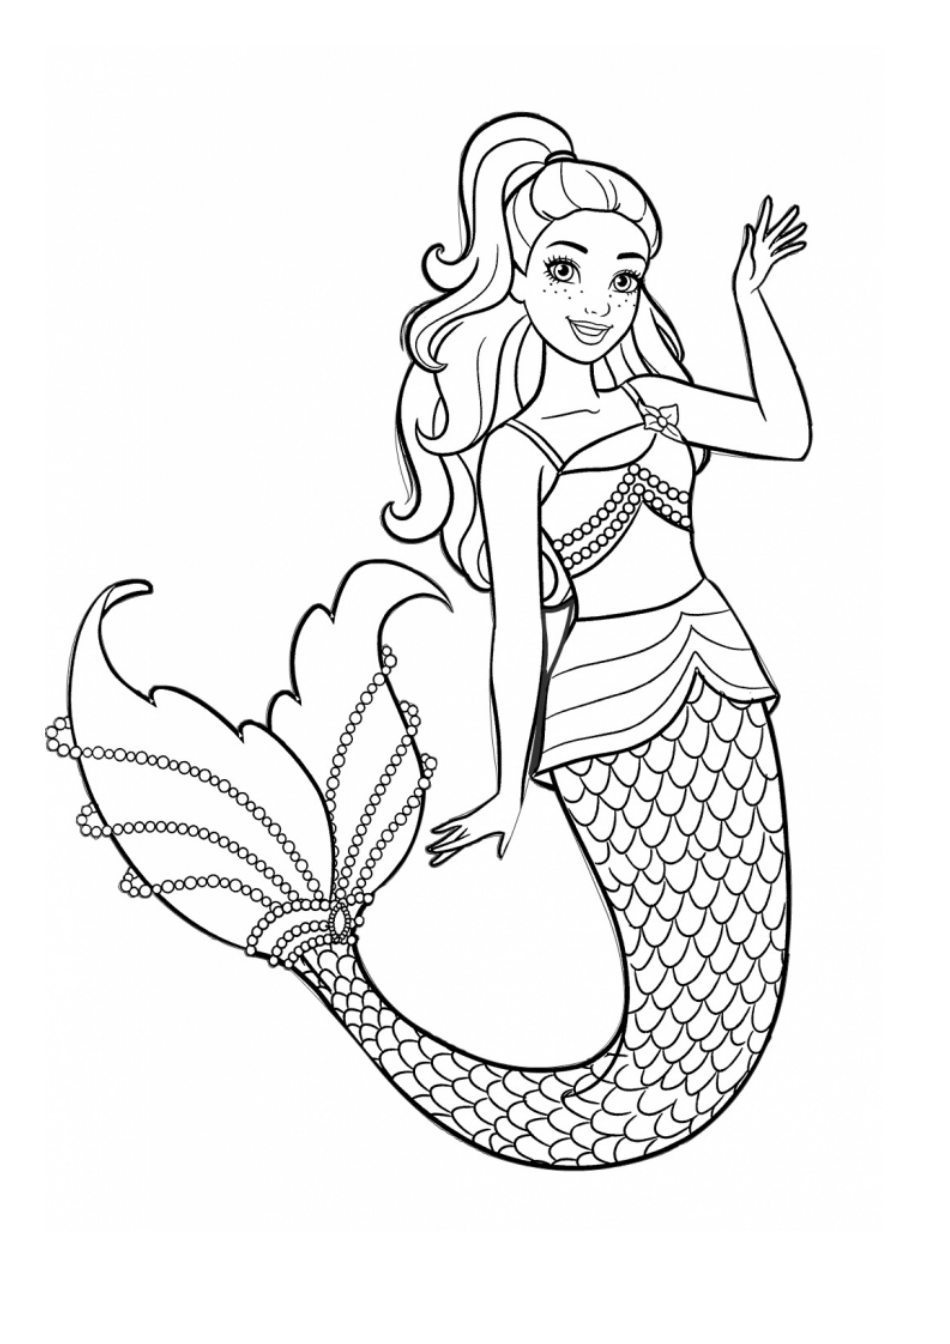 Teenage Mermaid Coloring Page - Printable Coloring Page is beautifully illustrated and depicts a teenage mermaid swimming in an enchanting underwater scene.